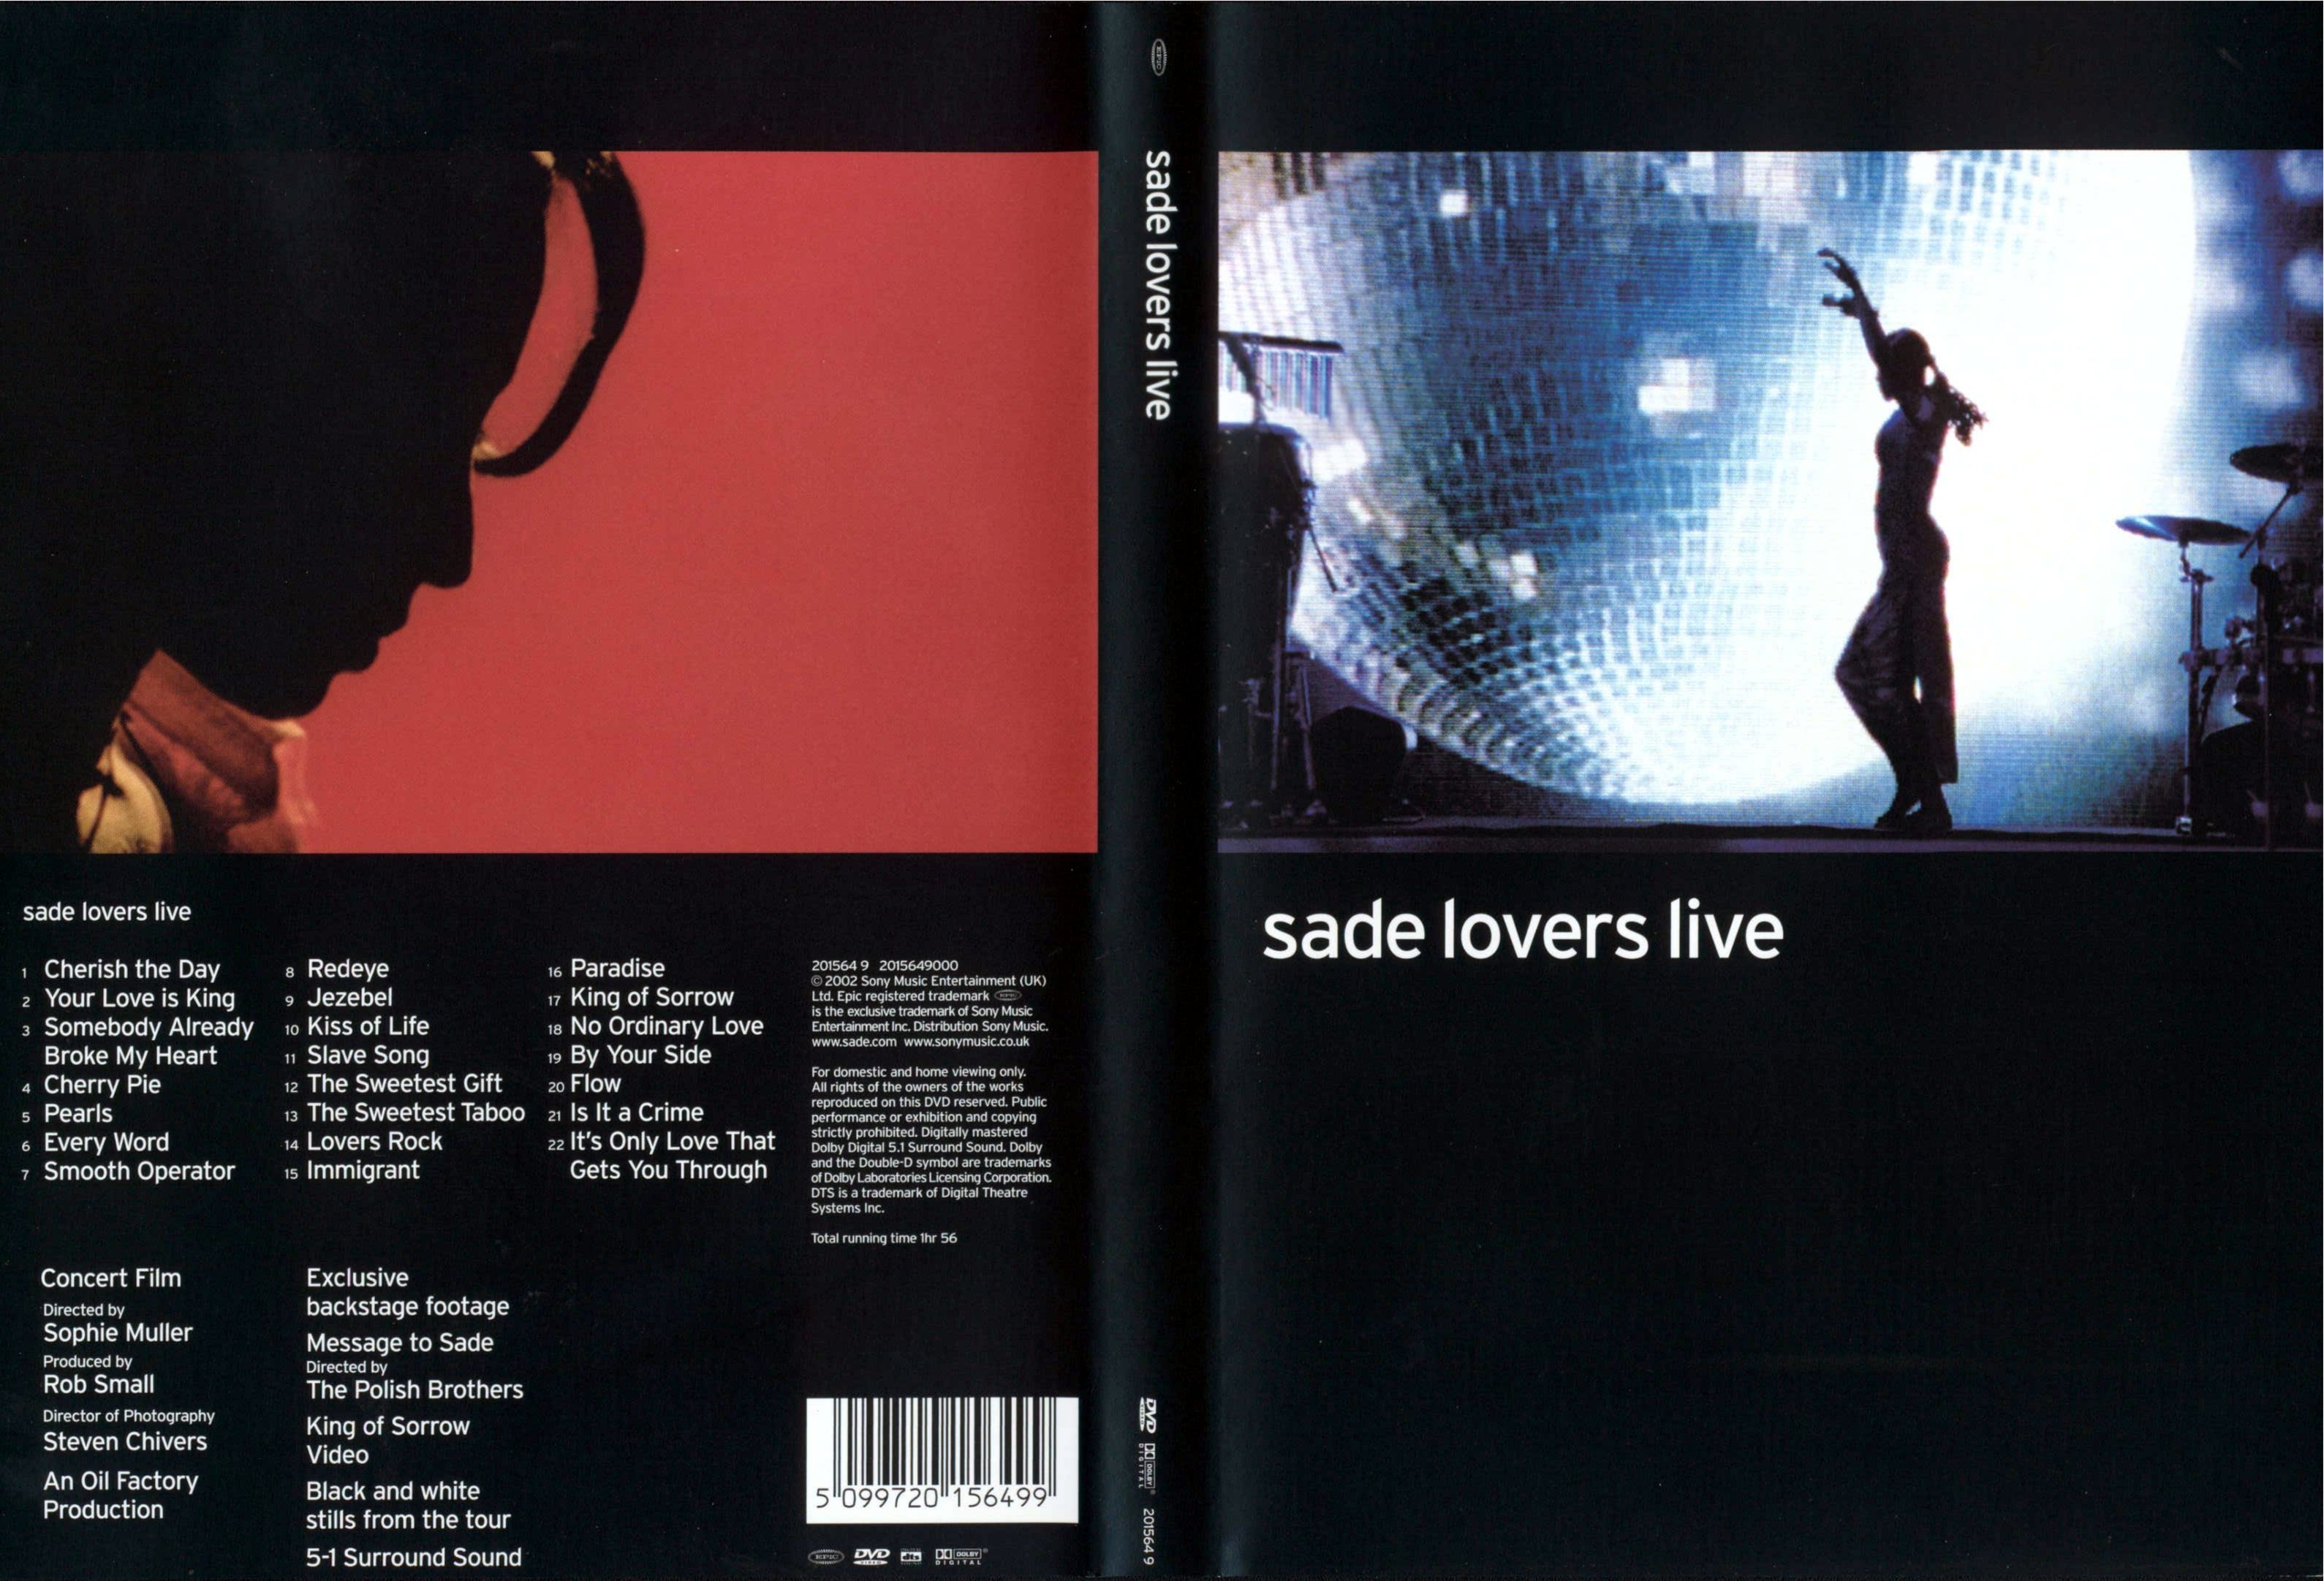 Jaquette DVD Sade lovers live